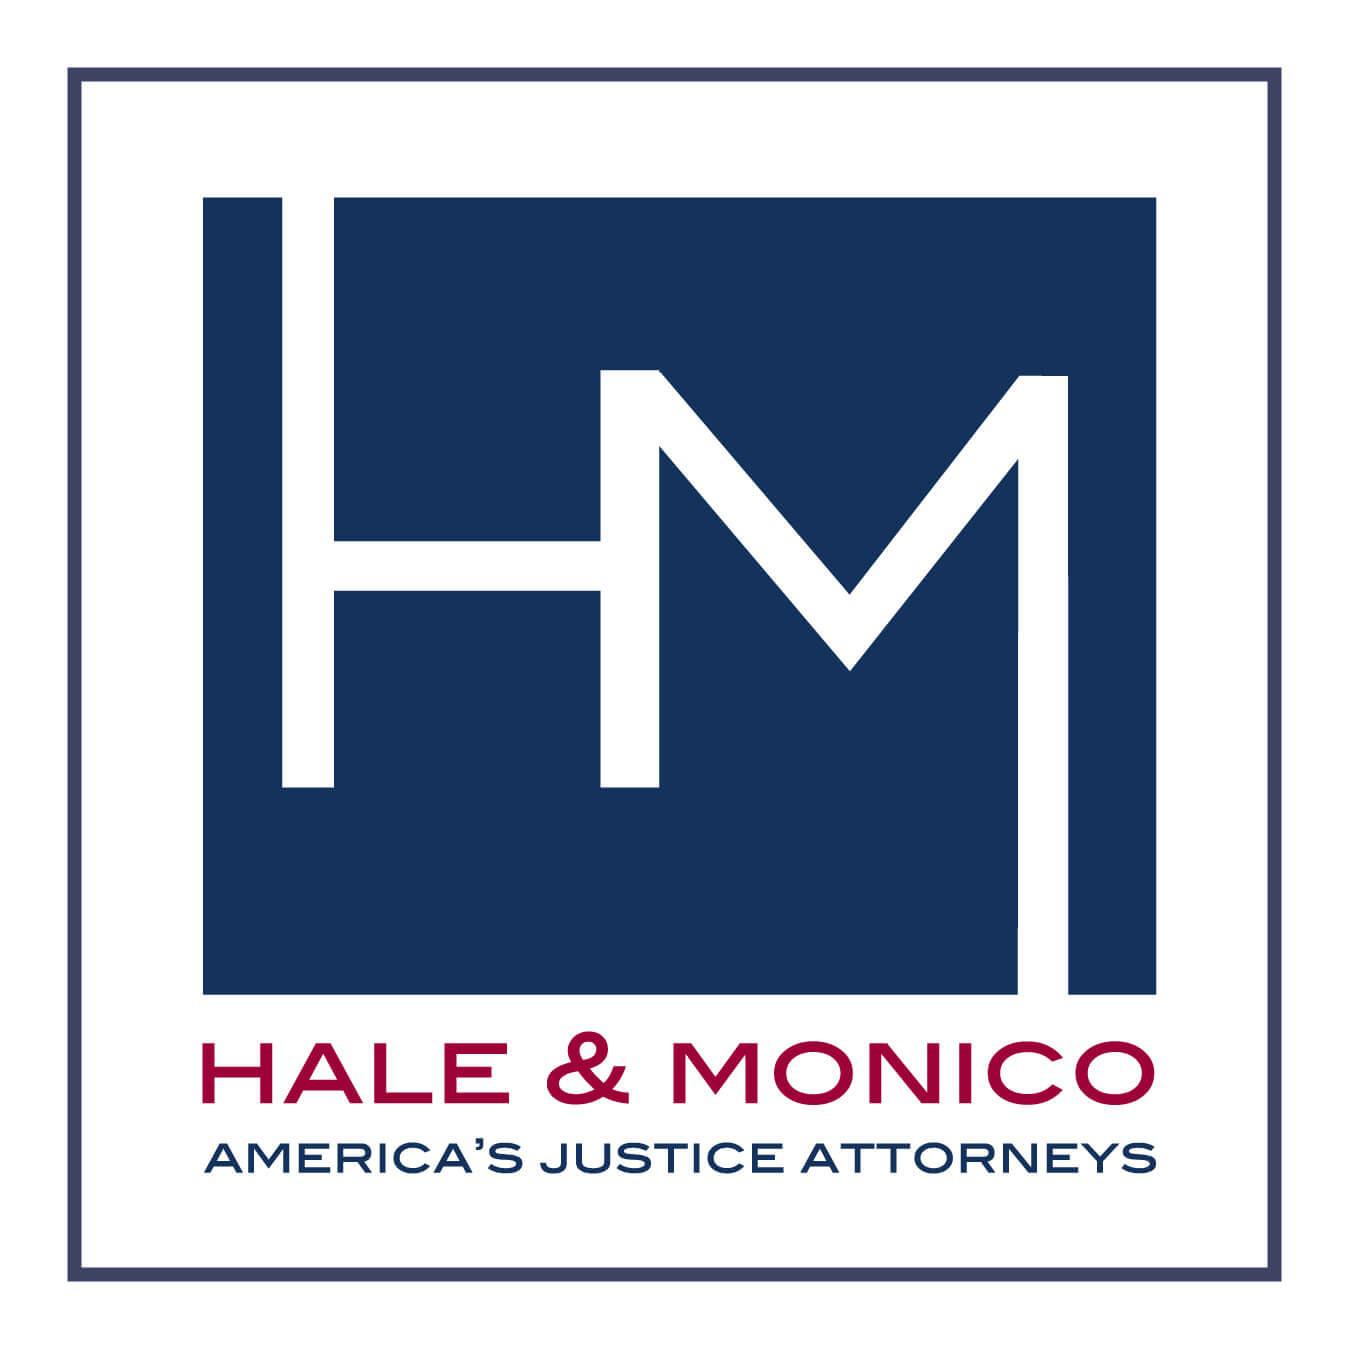 Logo for Hale & Monico law firm in New York. America's Justice Attorneys. Hale & Monico New York (212)810-2477